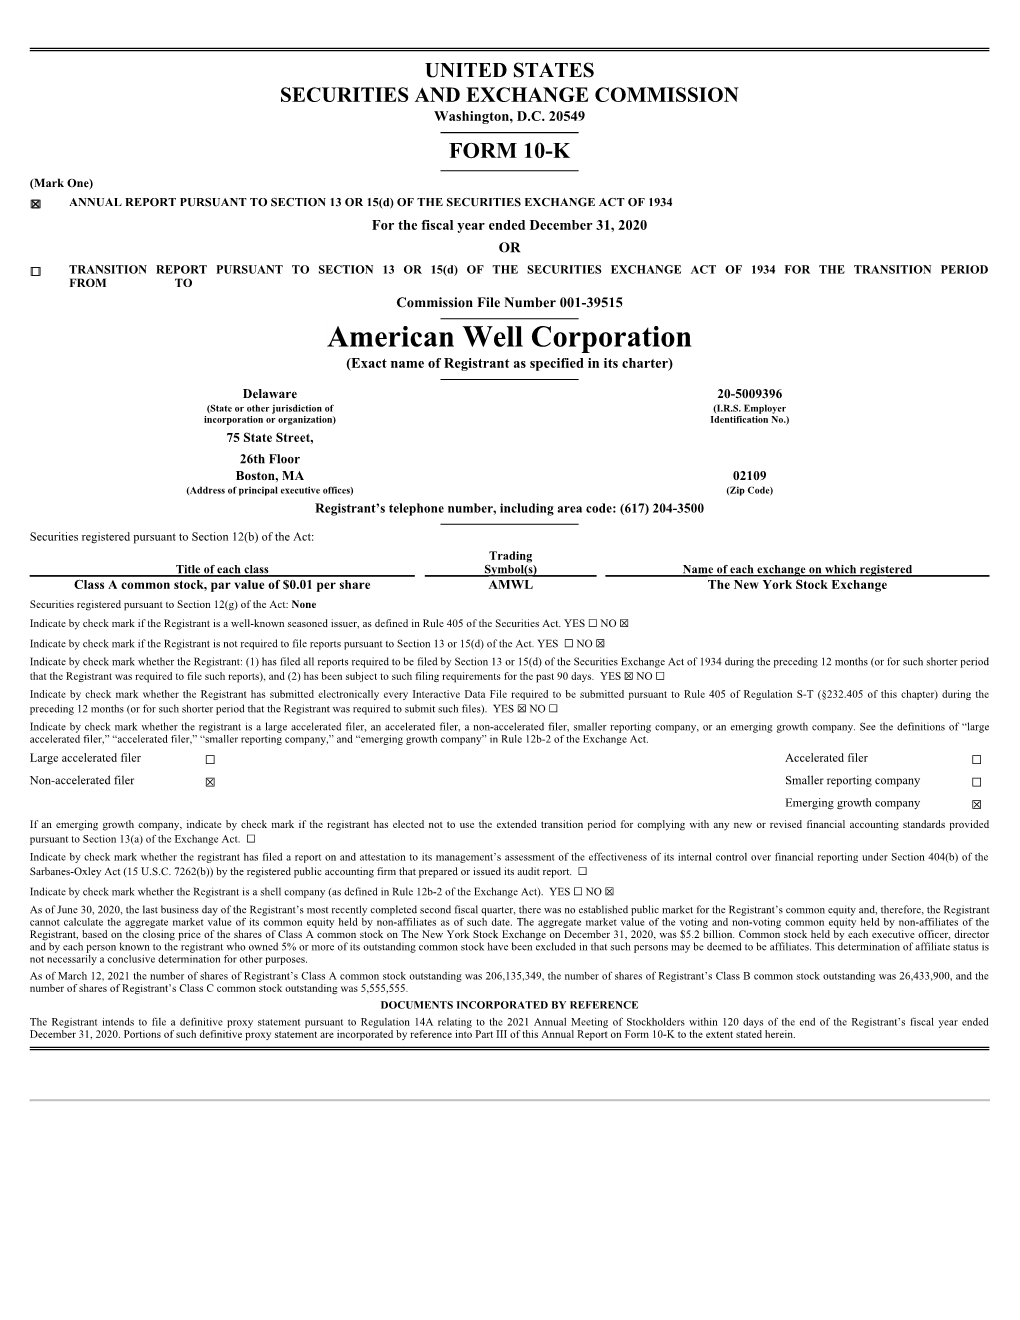 American Well Corporation (Exact Name of Registrant As Specified in Its Charter)